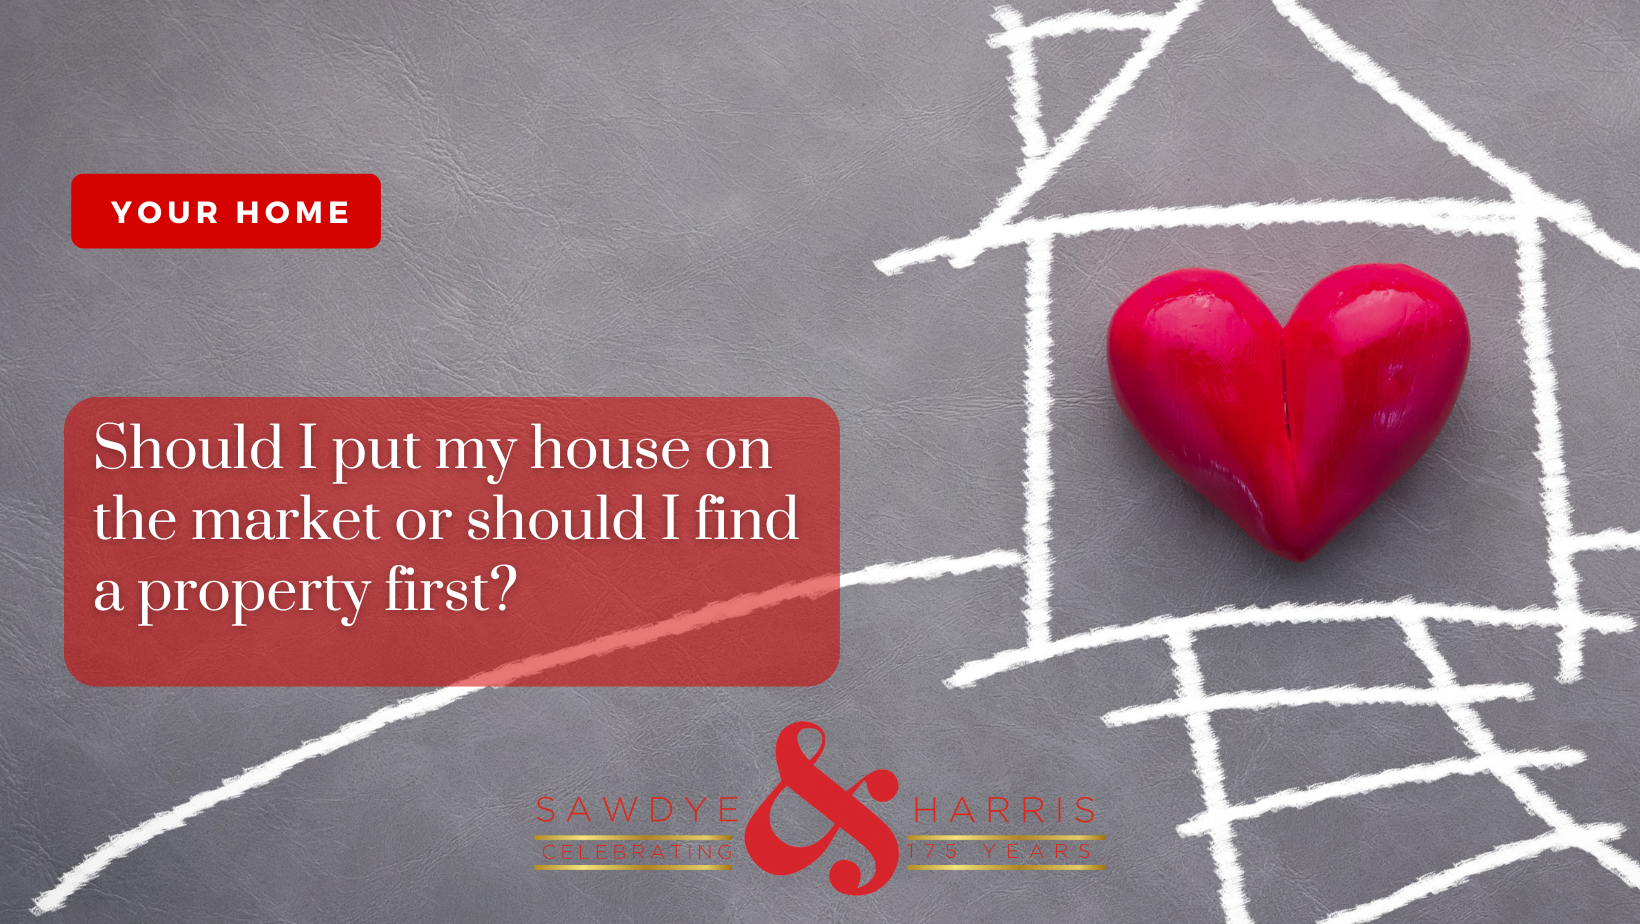 Should I put my house on the market or should I find a property first? 